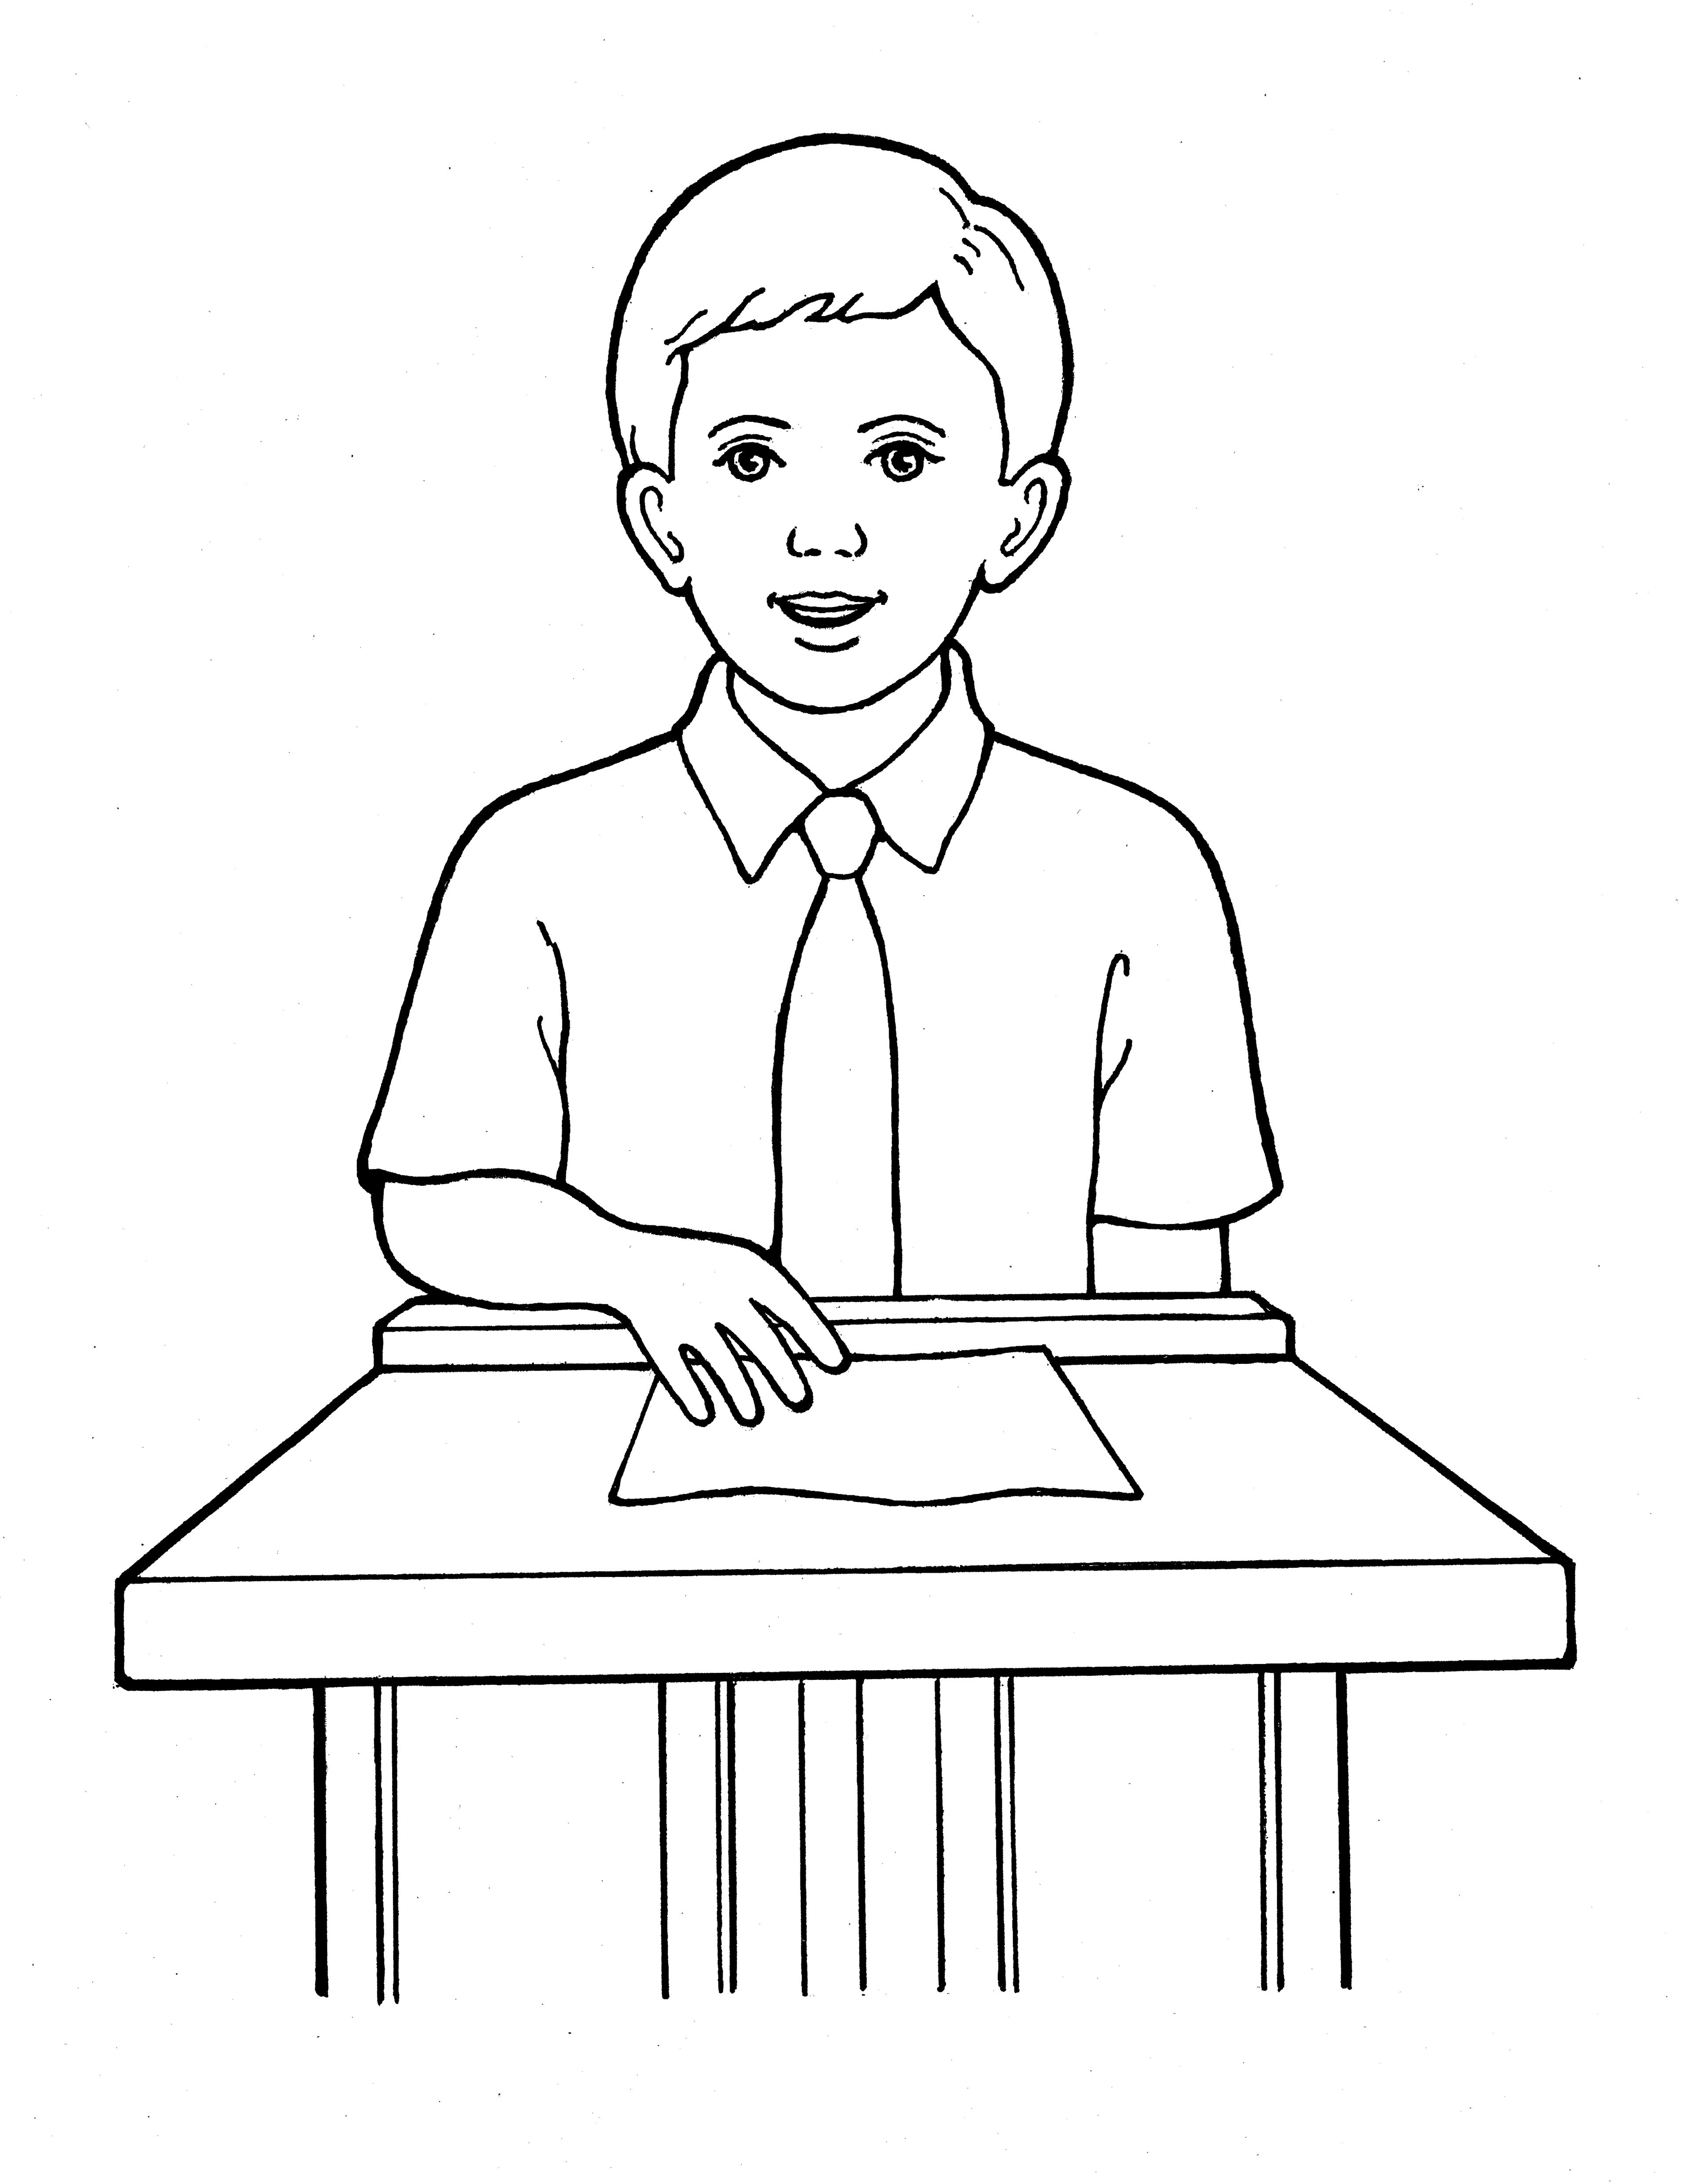 An illustration of a Primary boy standing at a podium to give a talk.